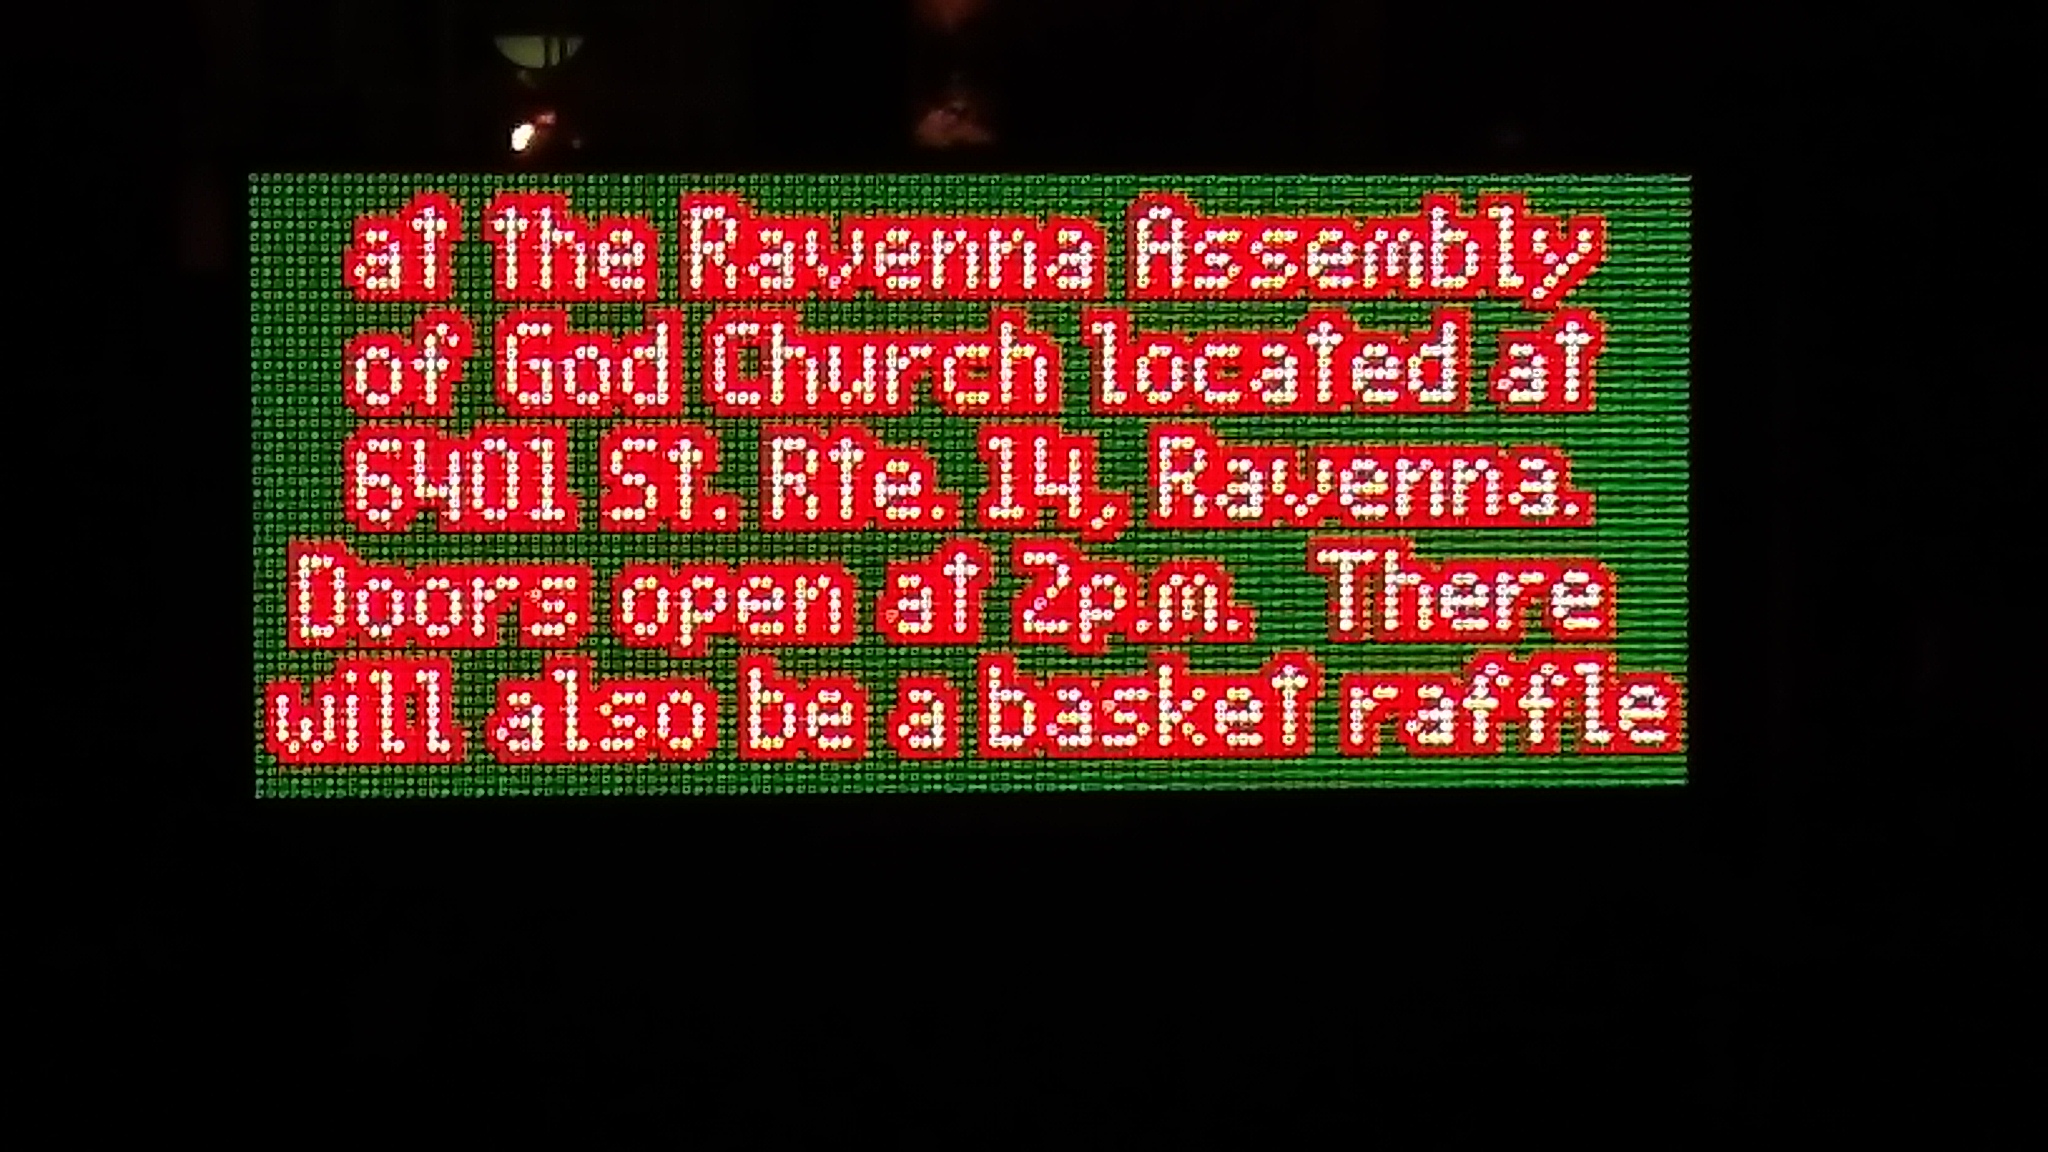 Image - at Ravenna Assembly of God, 6401 S-R 14 in Ravenna. There's a basket raffle!